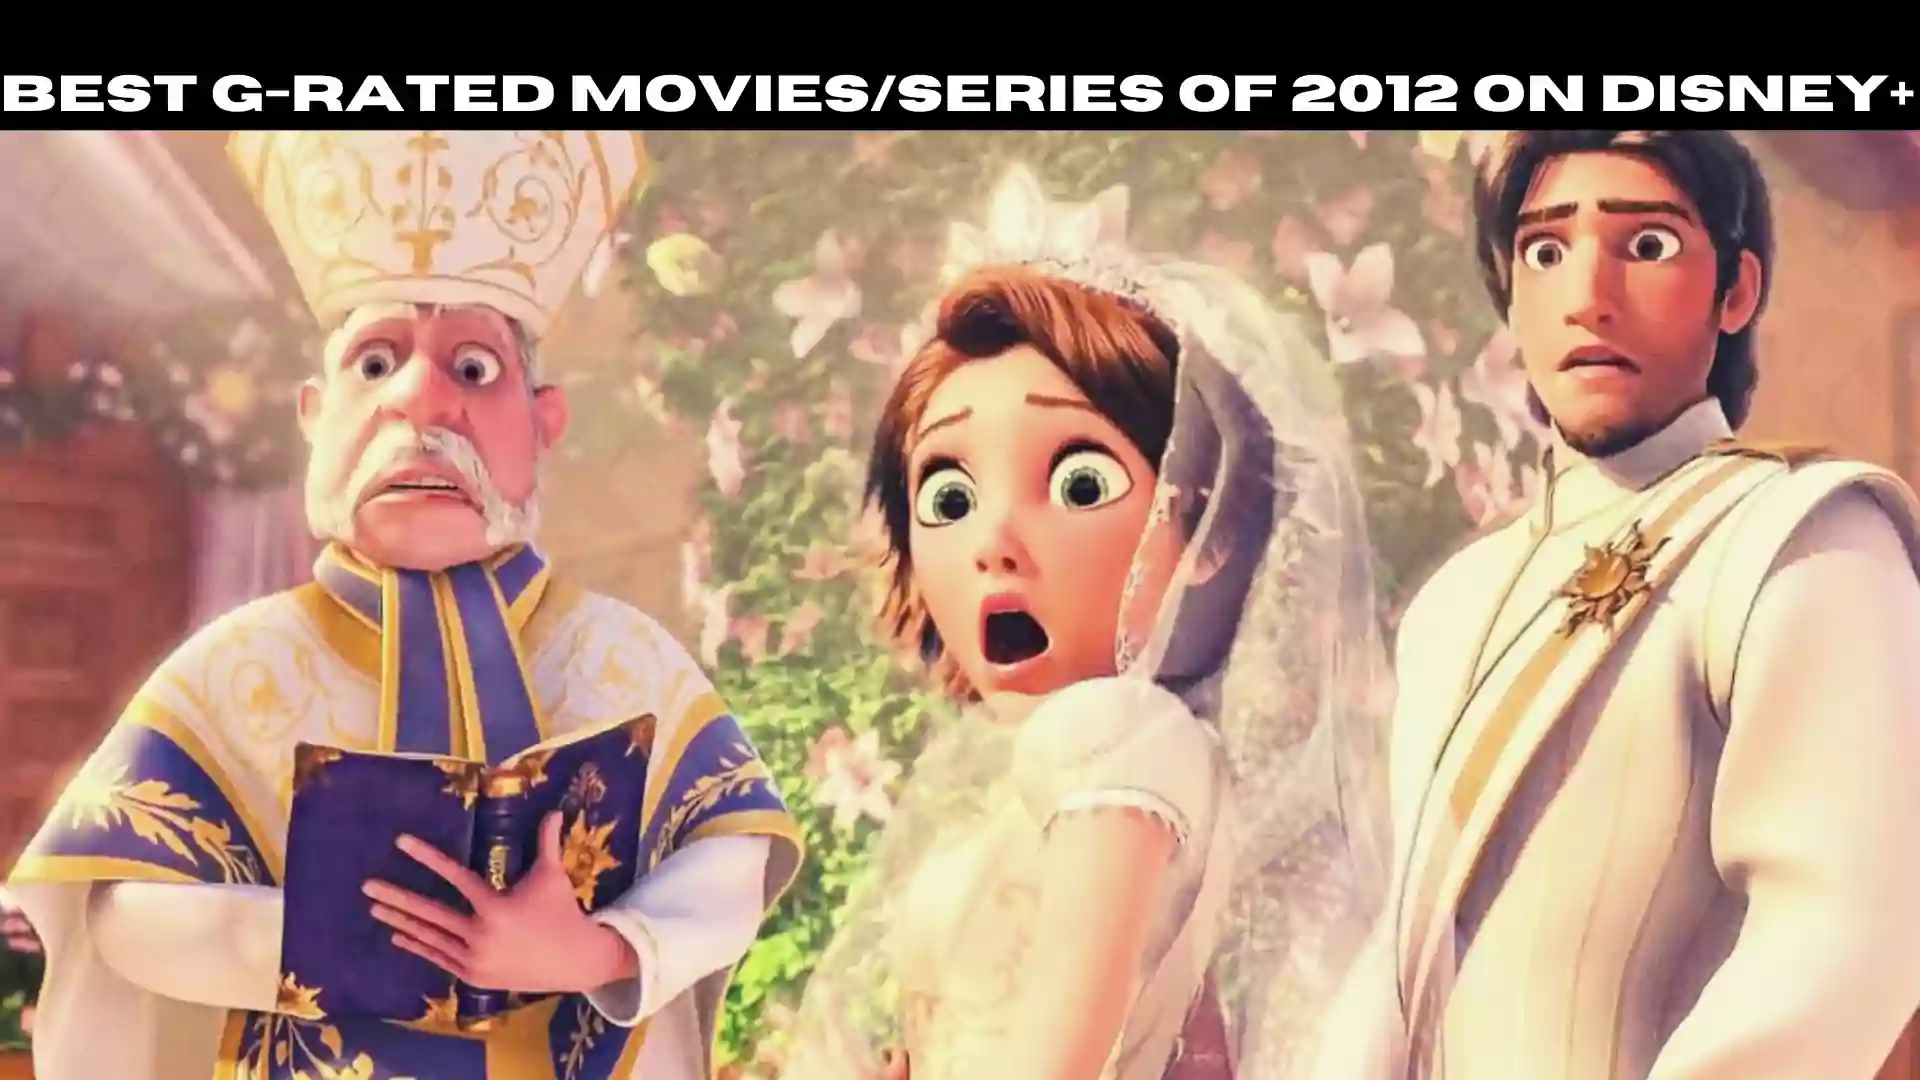 Best G-Rated Movies/series of 2012 on Disney+